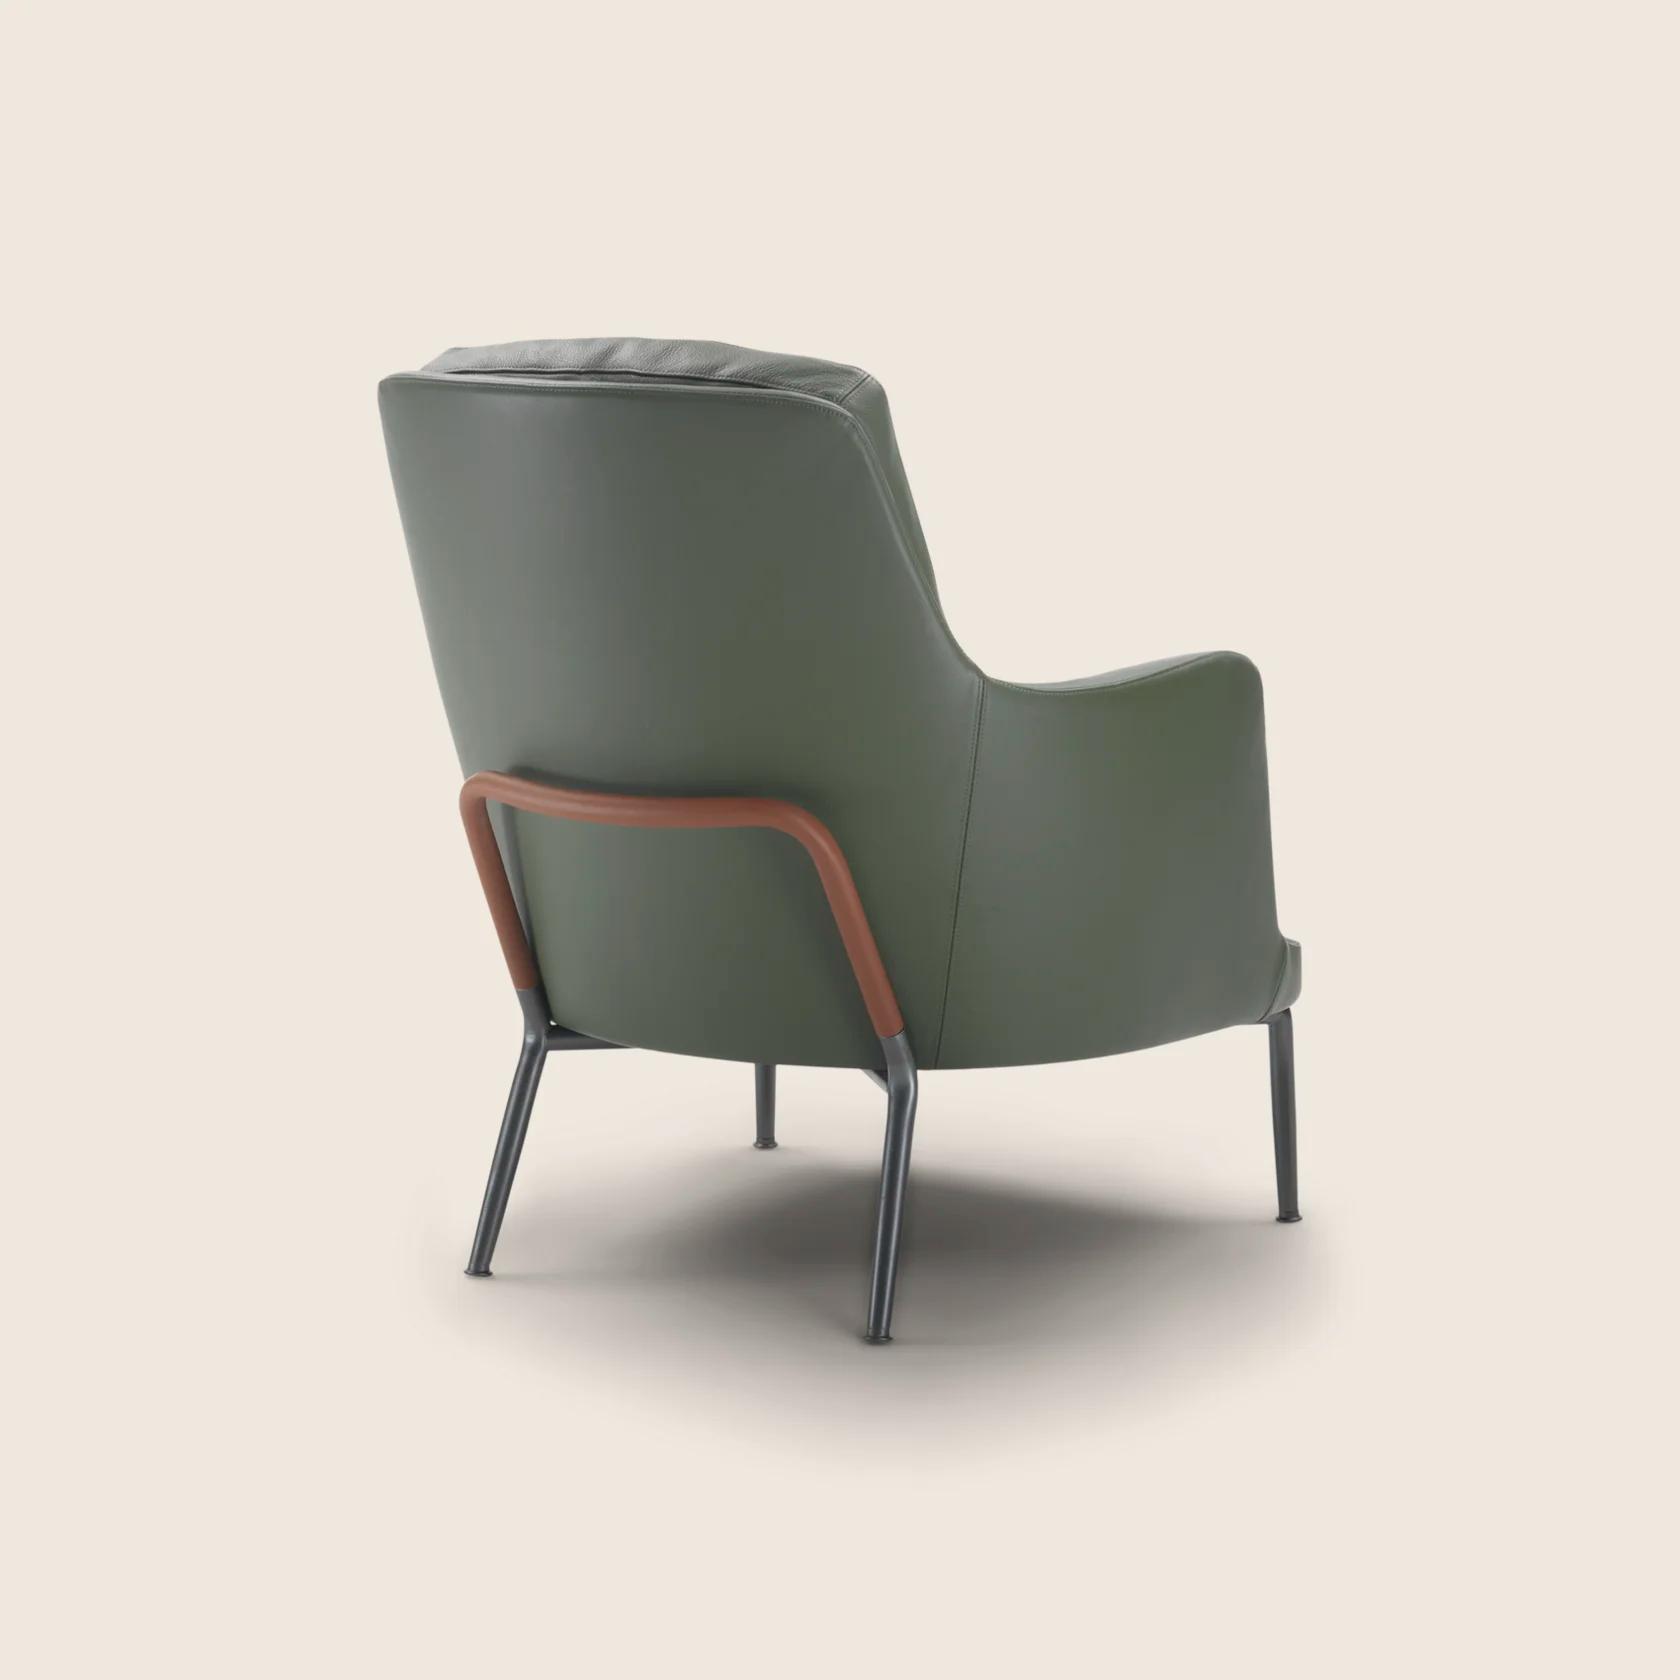 028623_MARLEY_ARMCHAIR_07.png